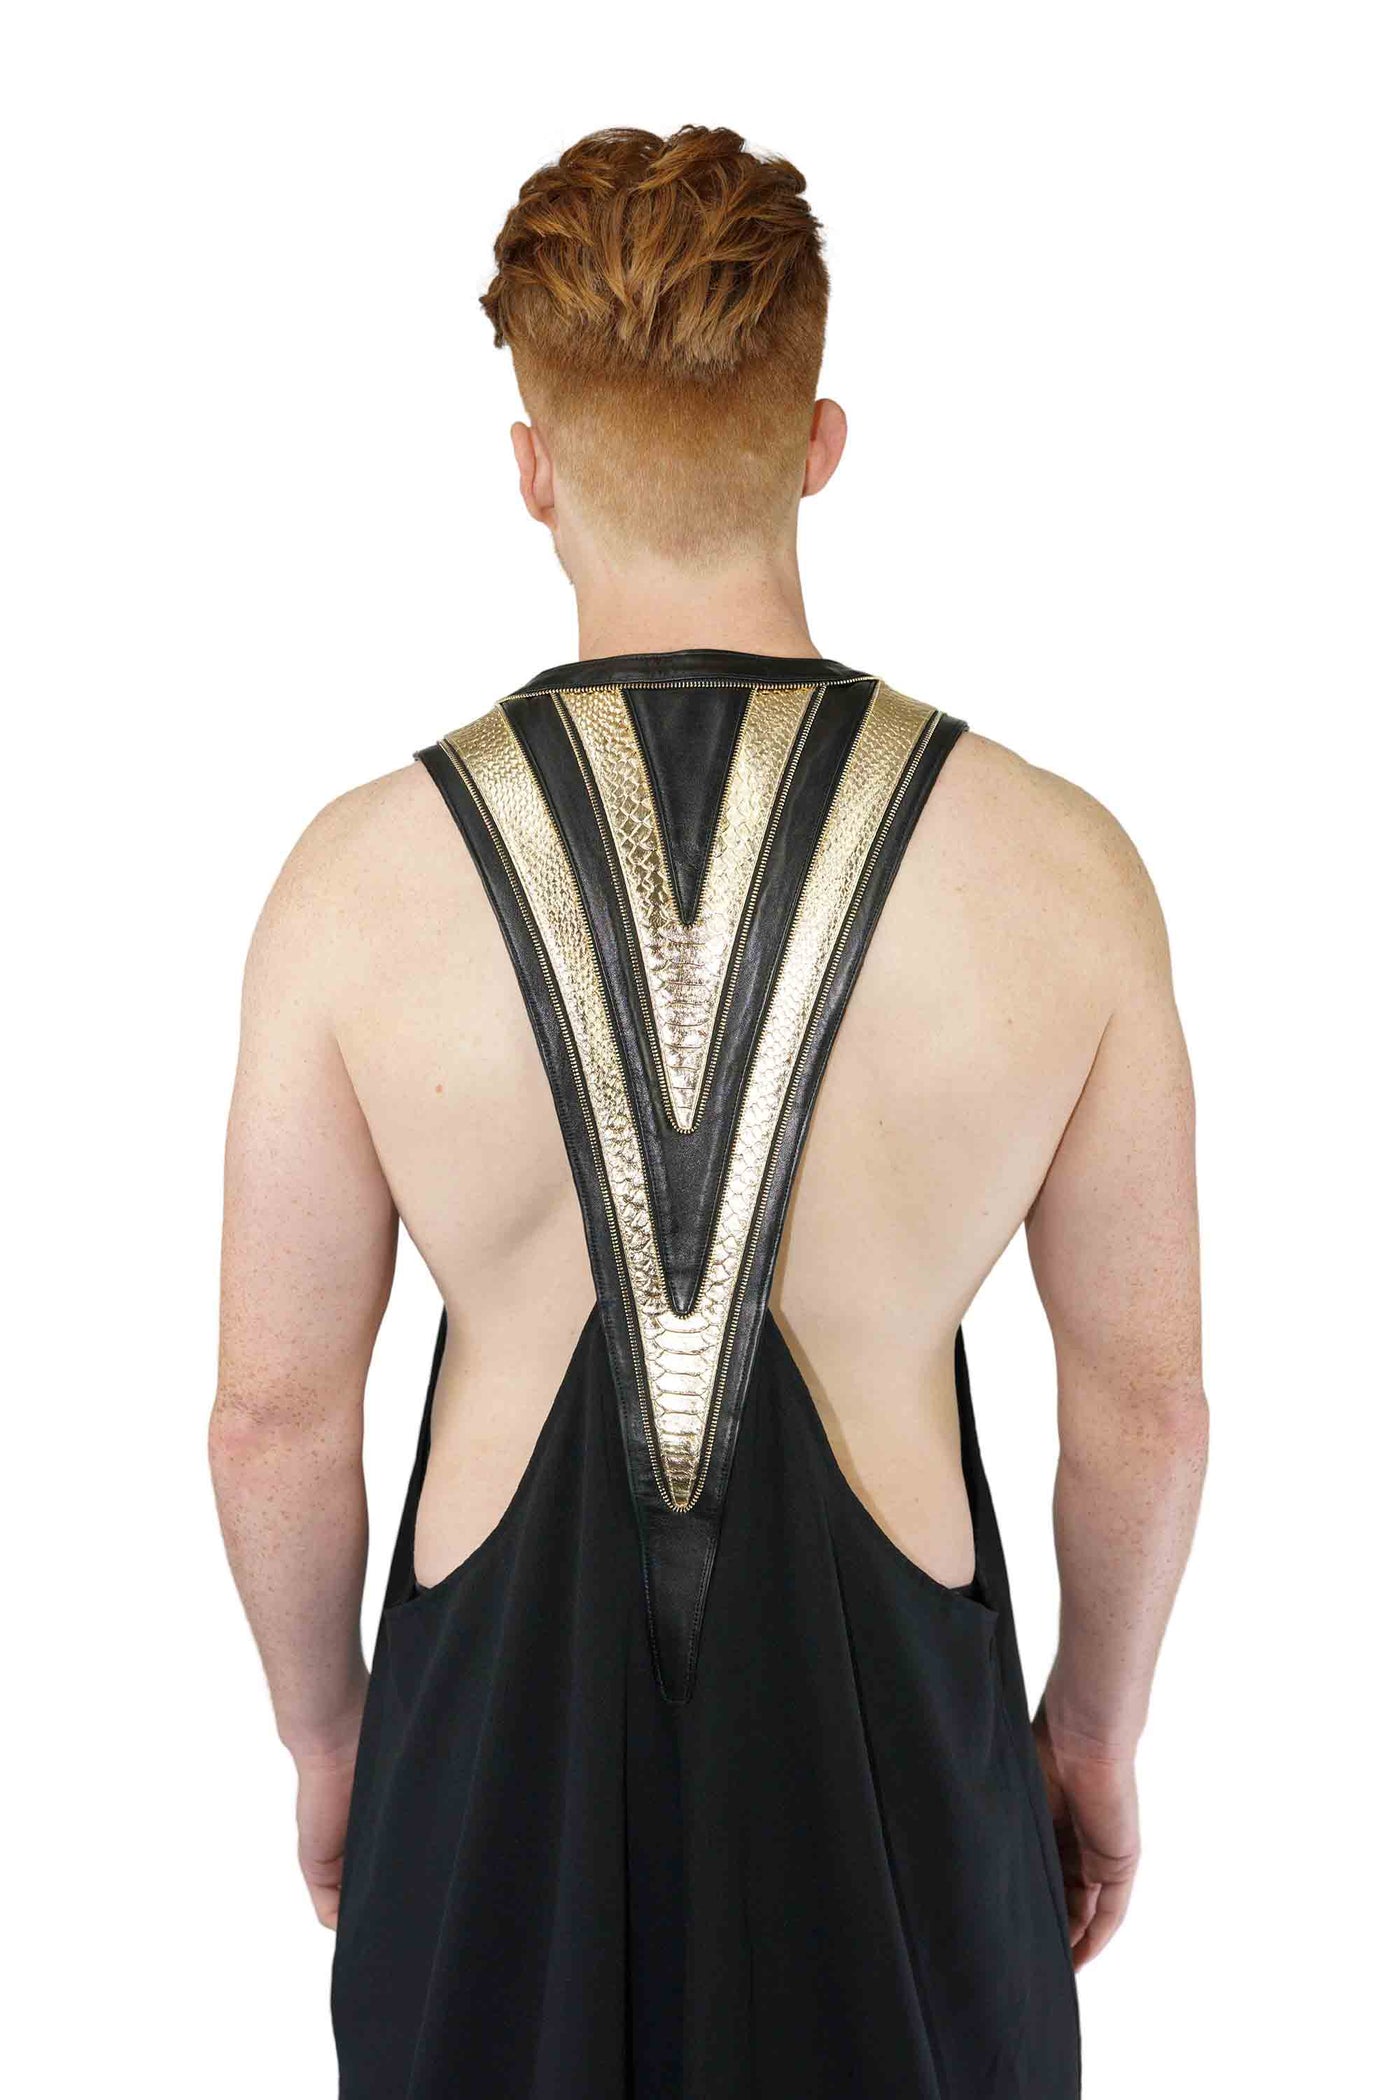 man wearing a black and gold kimono vest from Love Khaos